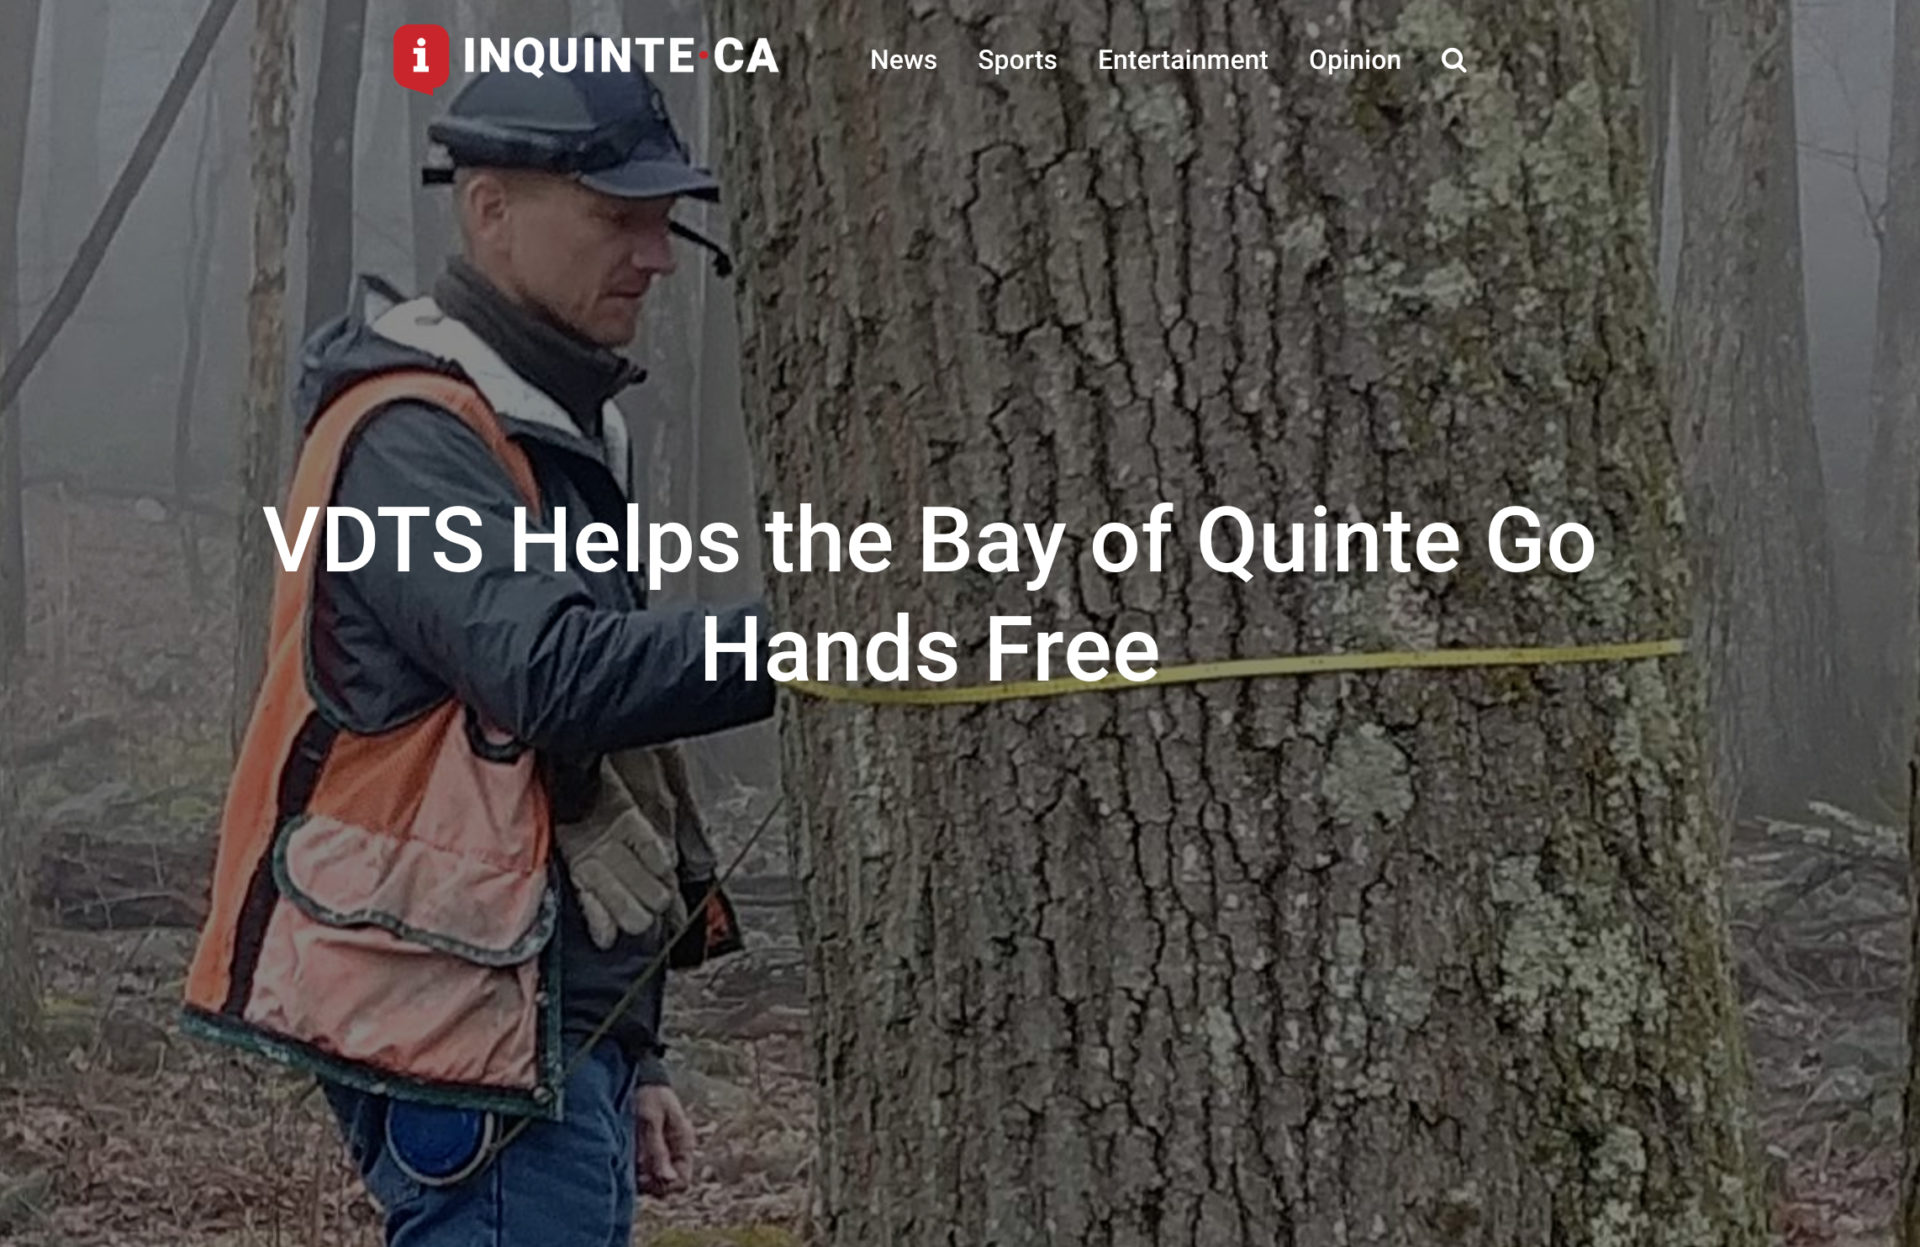 VDTS Helps the Bay of Quinte Go Hands Free